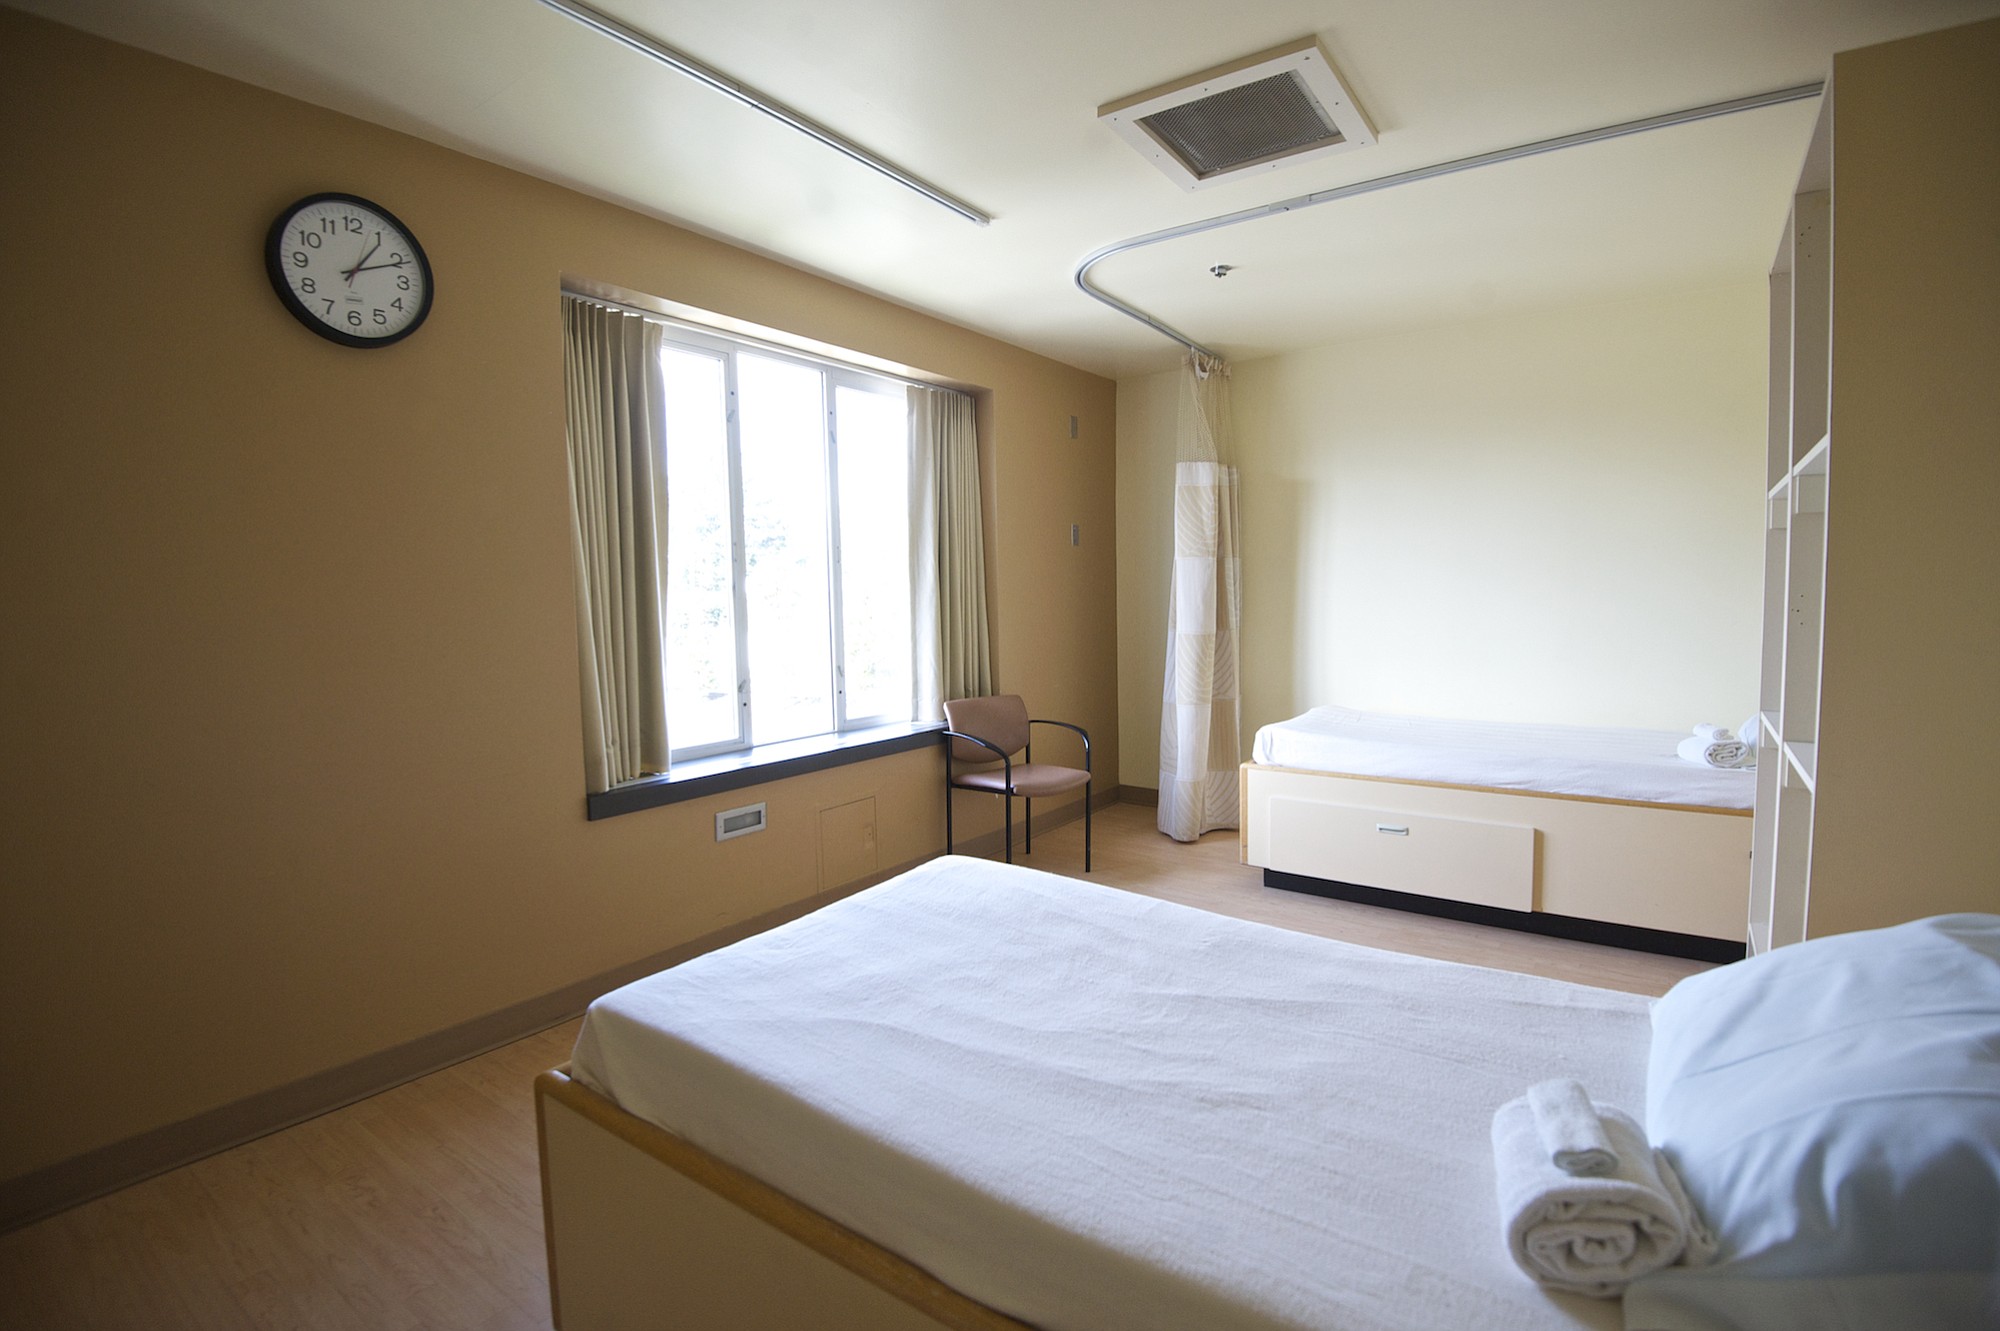 PeaceHealth Southwest's Memorial Campus in Vancouver houses a 12-bed inpatient unit for mental health services.